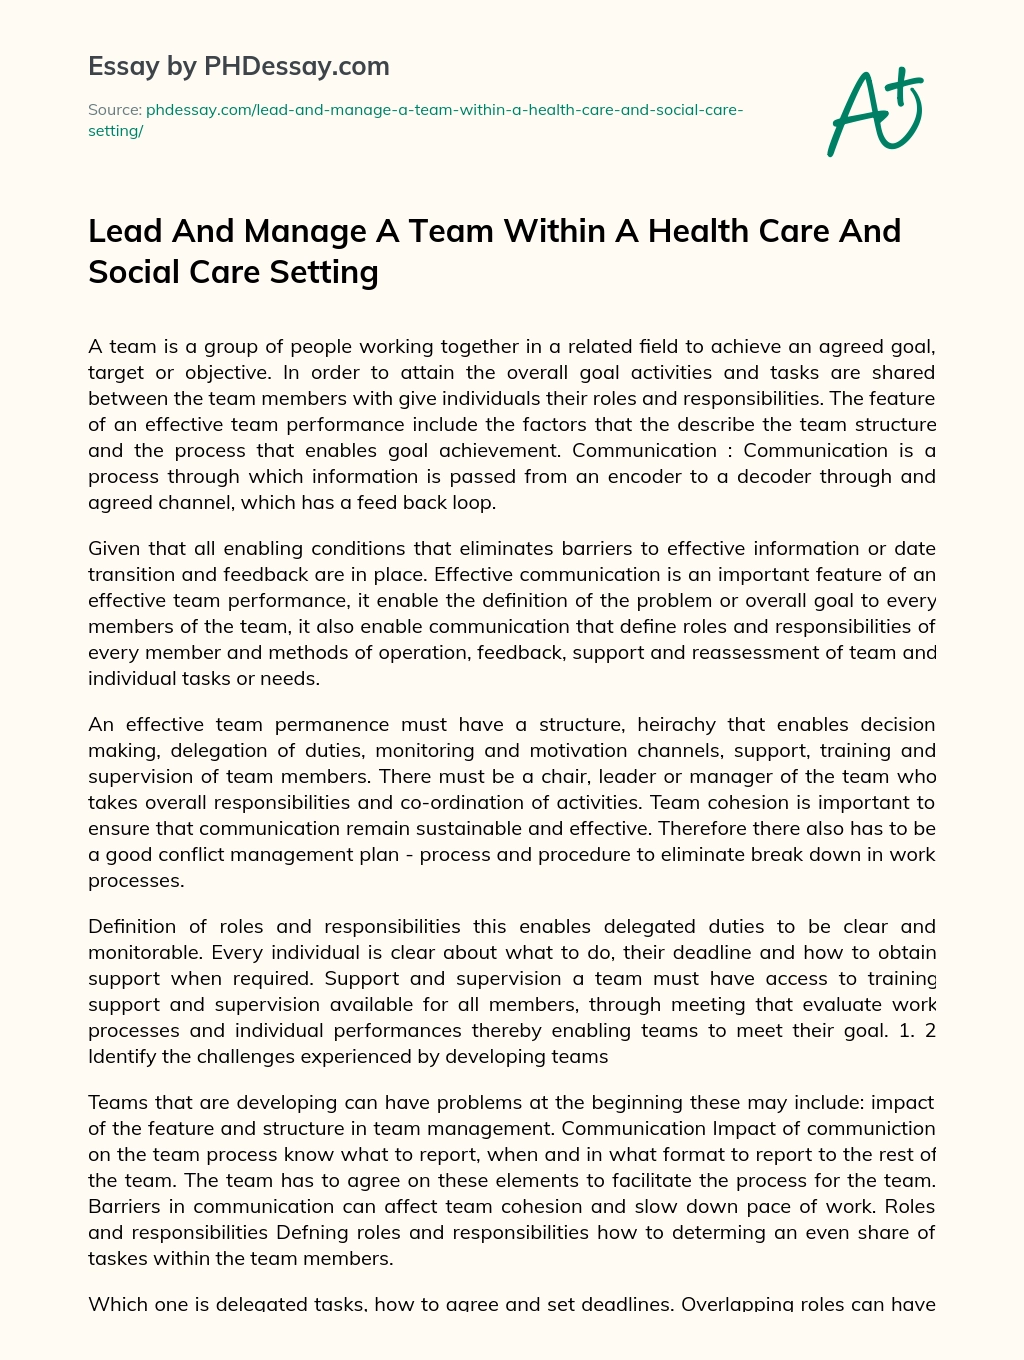 Lead And Manage A Team Within A Health Care And Social Care Setting essay